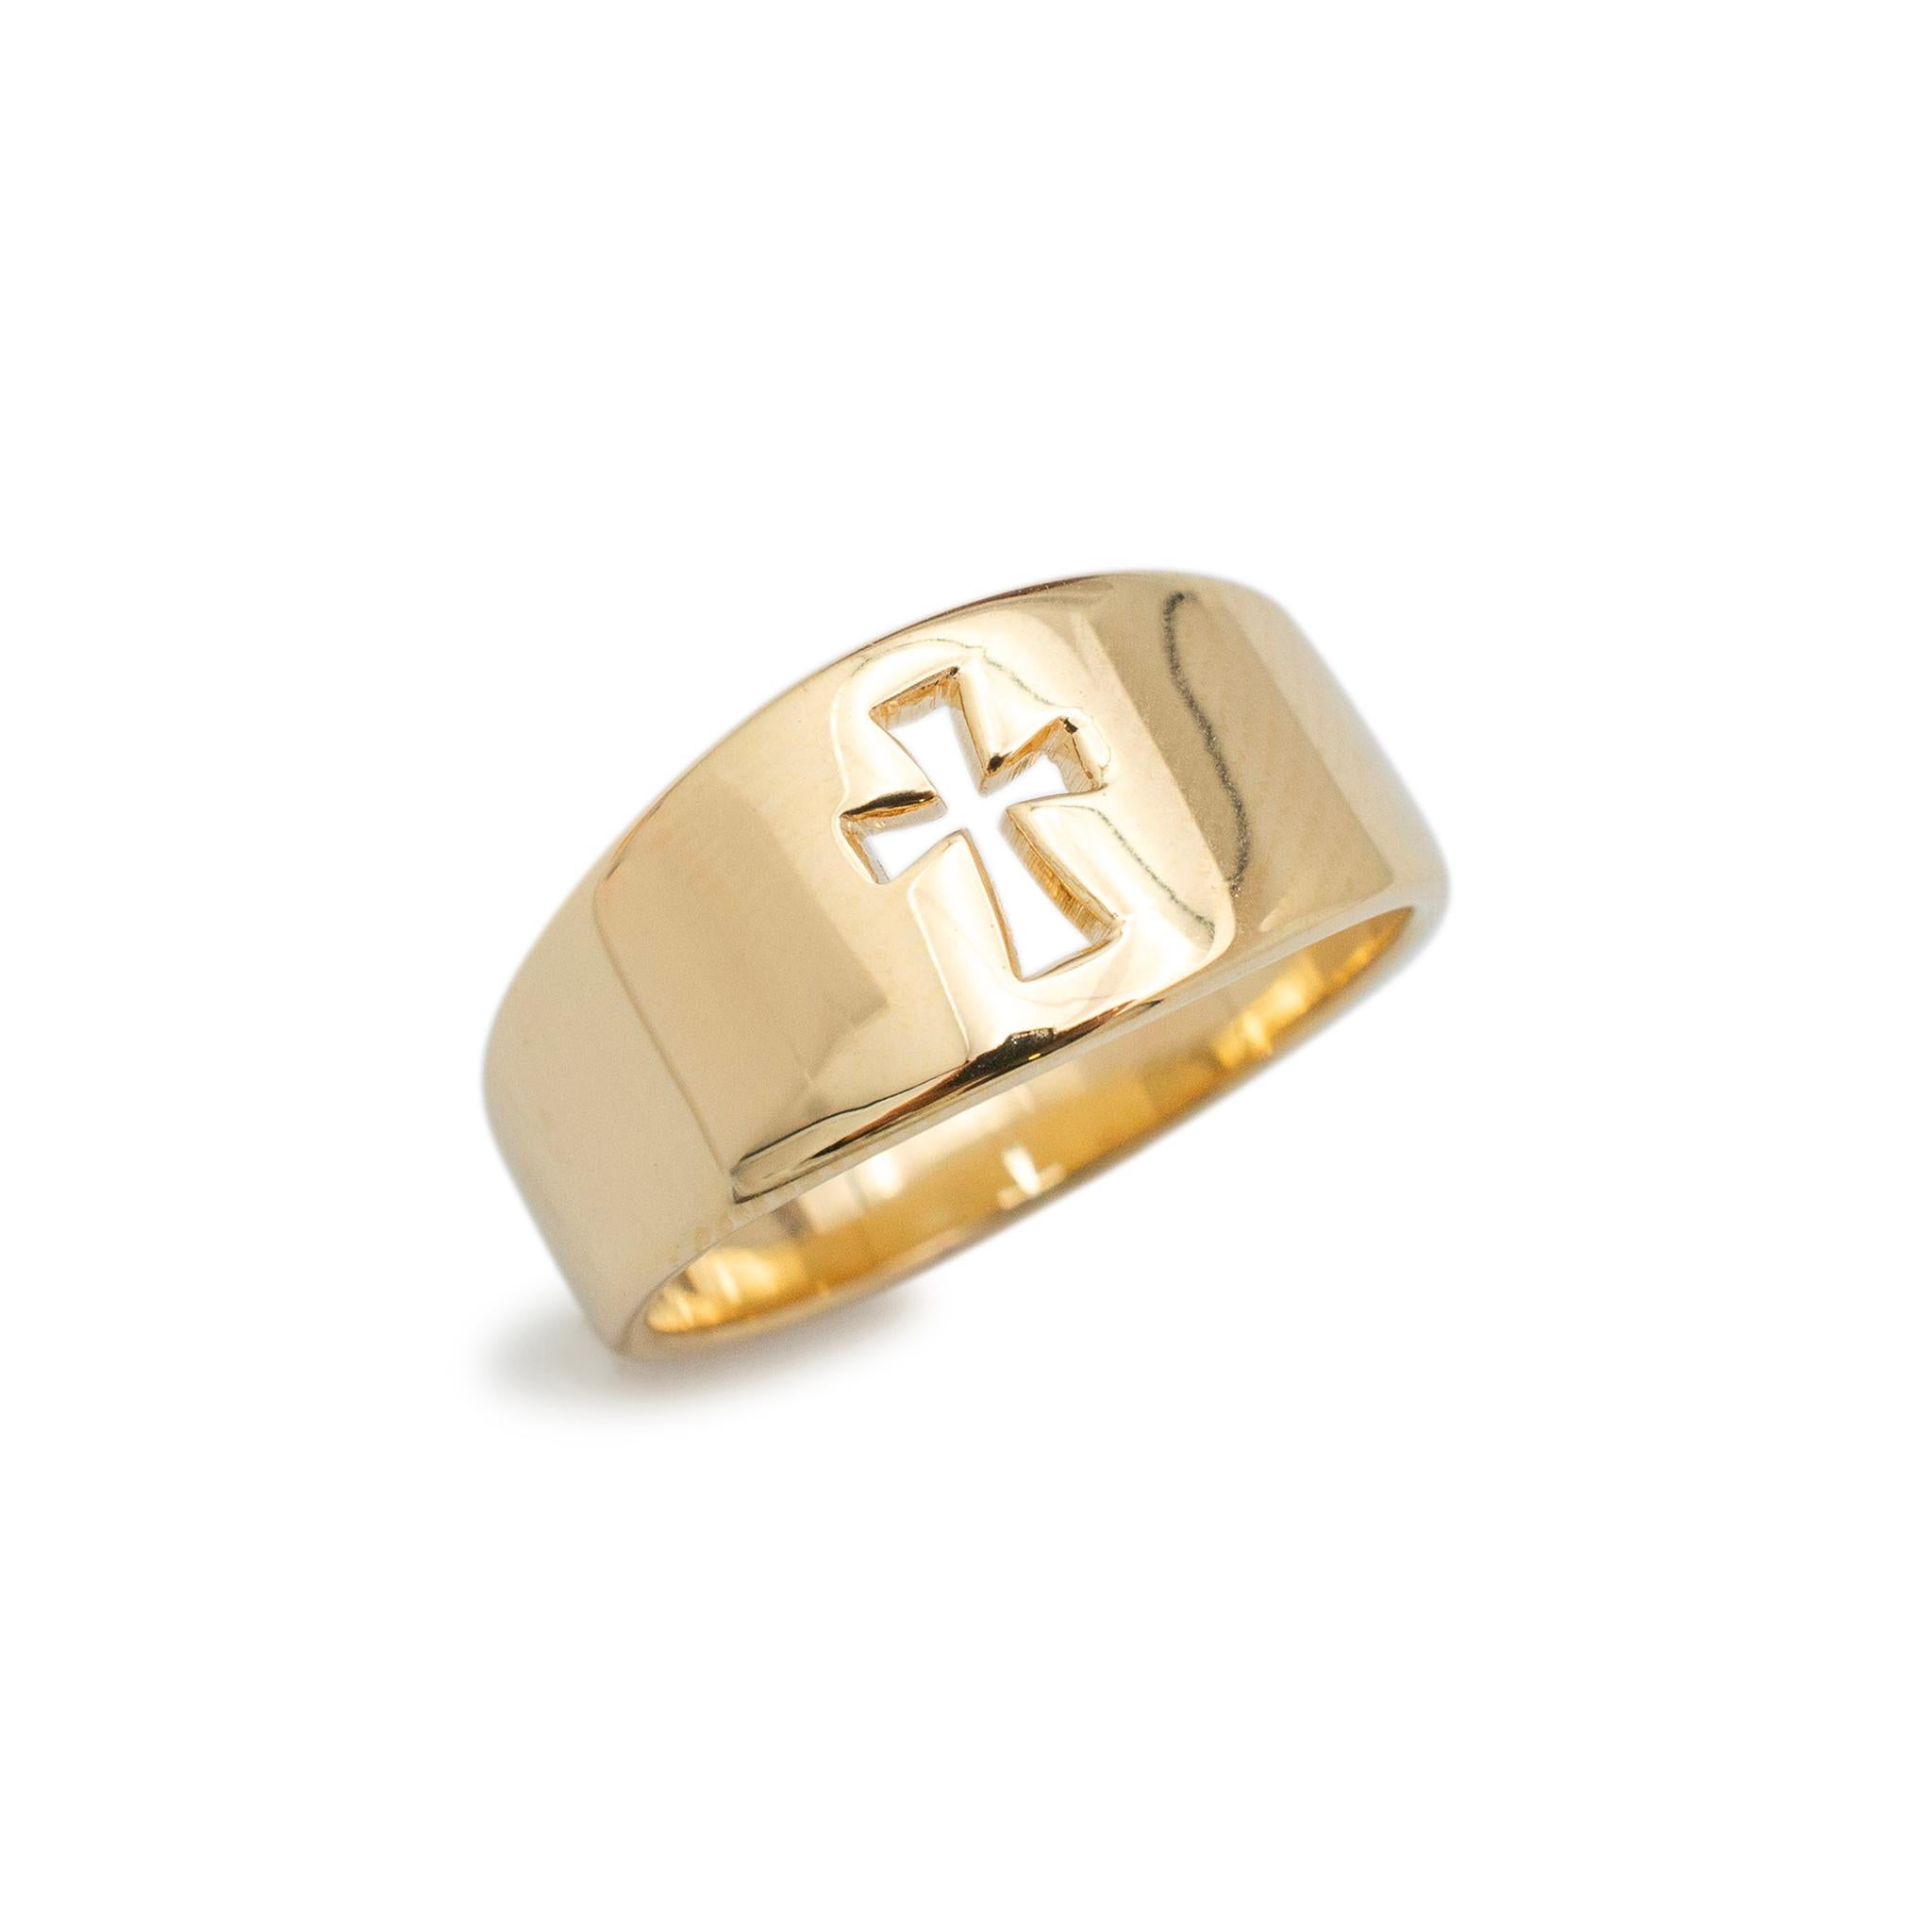 Brand: James Avery 

Gender: Unisex

Metal Type: 14K Yellow Gold

Ring Size: 5.5

Width: 8.60 mm tapering to 4.00 mm 

Total weight: 4.20 grams

14K yellow gold band with a tapered comfort-fit shank. The metal was tested and determined to be 14K